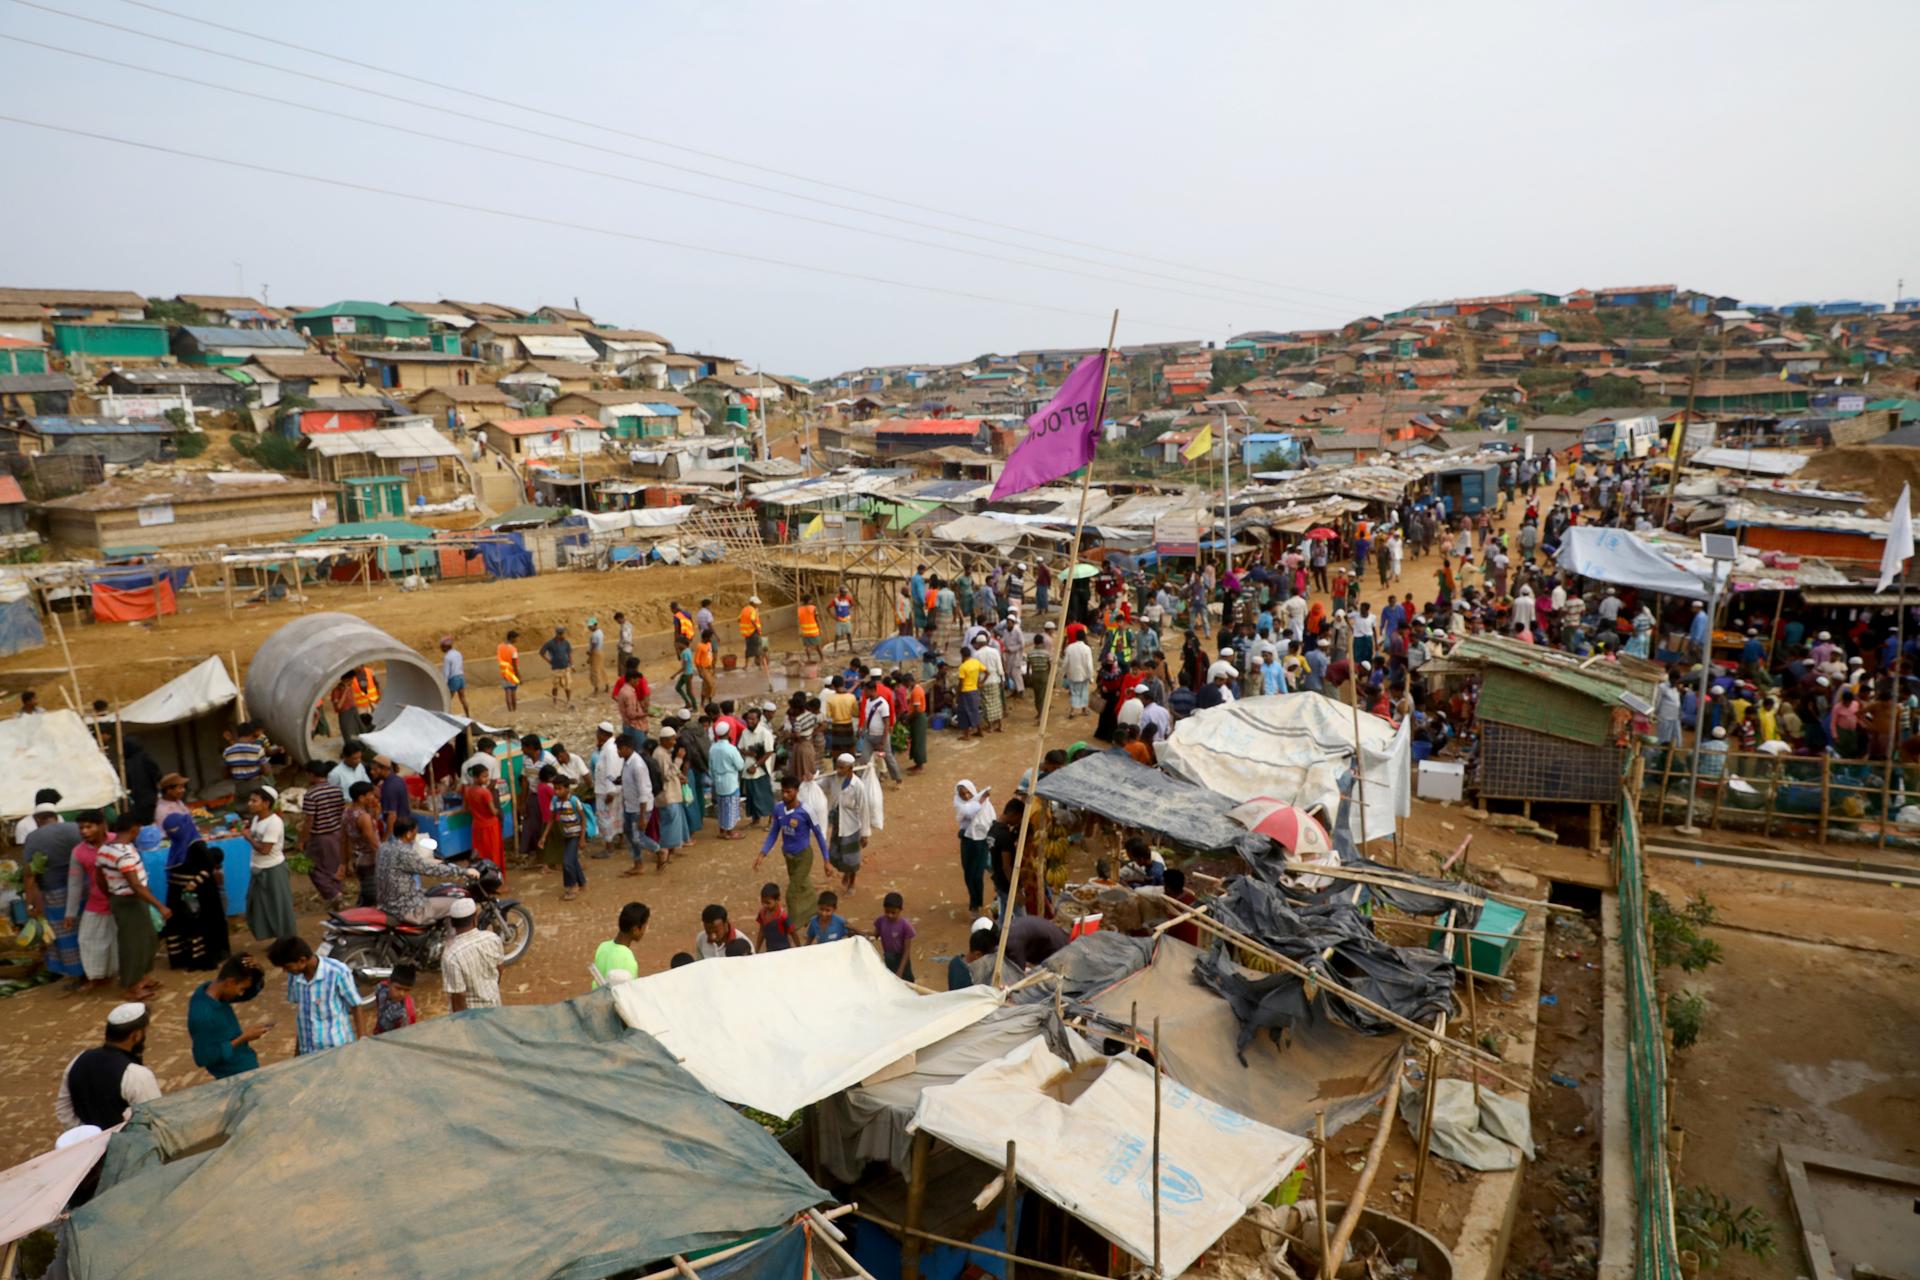 Rohingya refugees stand in a makeshift refugee camp made mostly of tents.